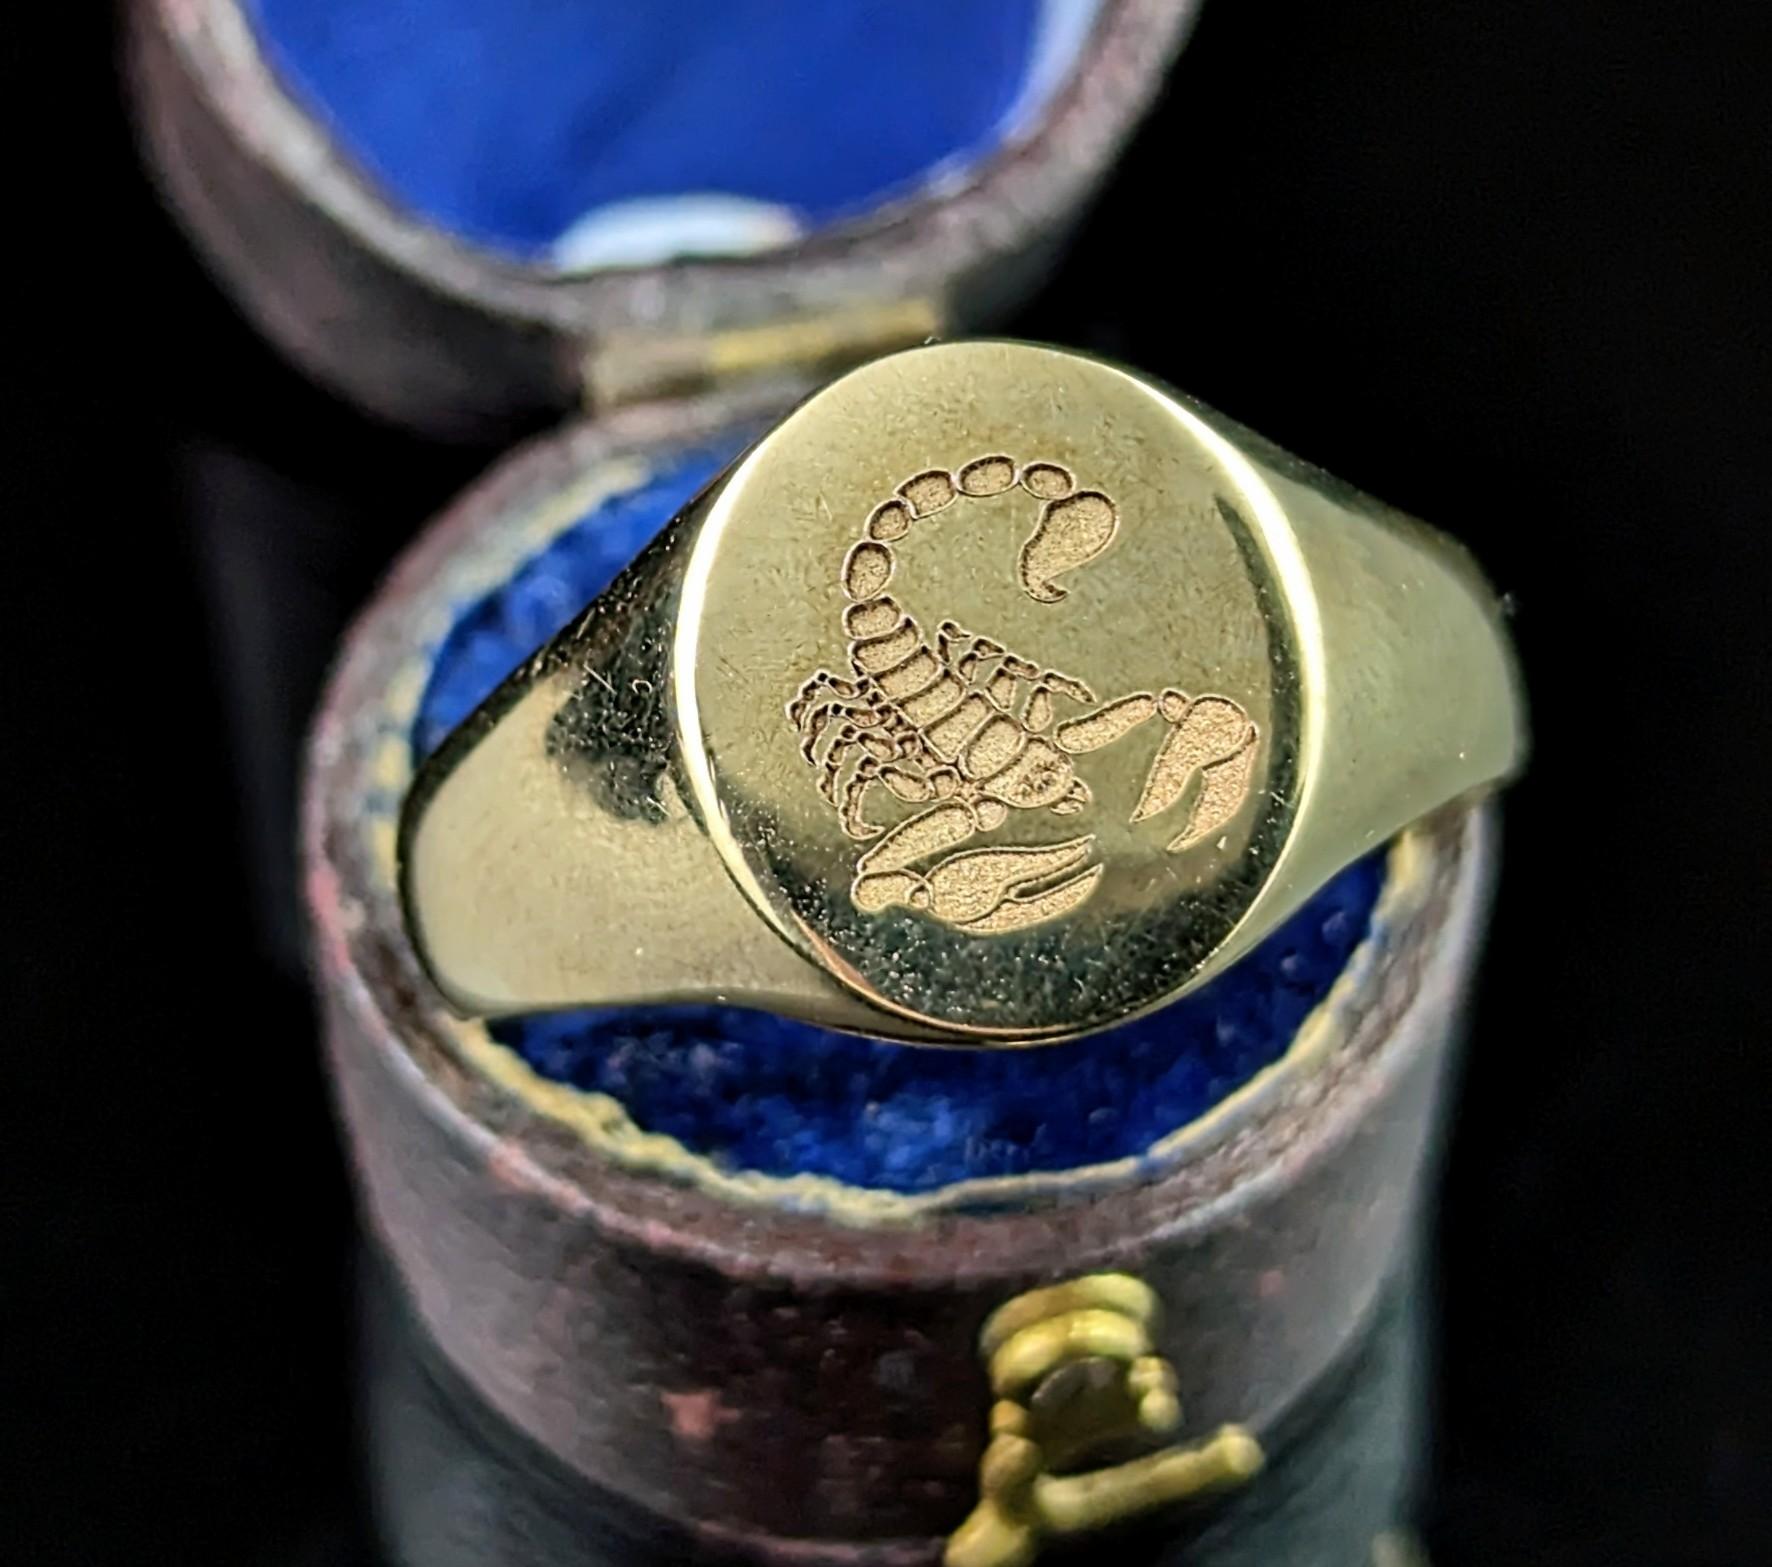 If you like a big, solid, chunky signet ring then this beauty is for you!

Lovely rich yellow gold, high polished with a smooth band and thick set shoulders, the face is an oval shape and has been engraved with a scorpion.

The engraving is very